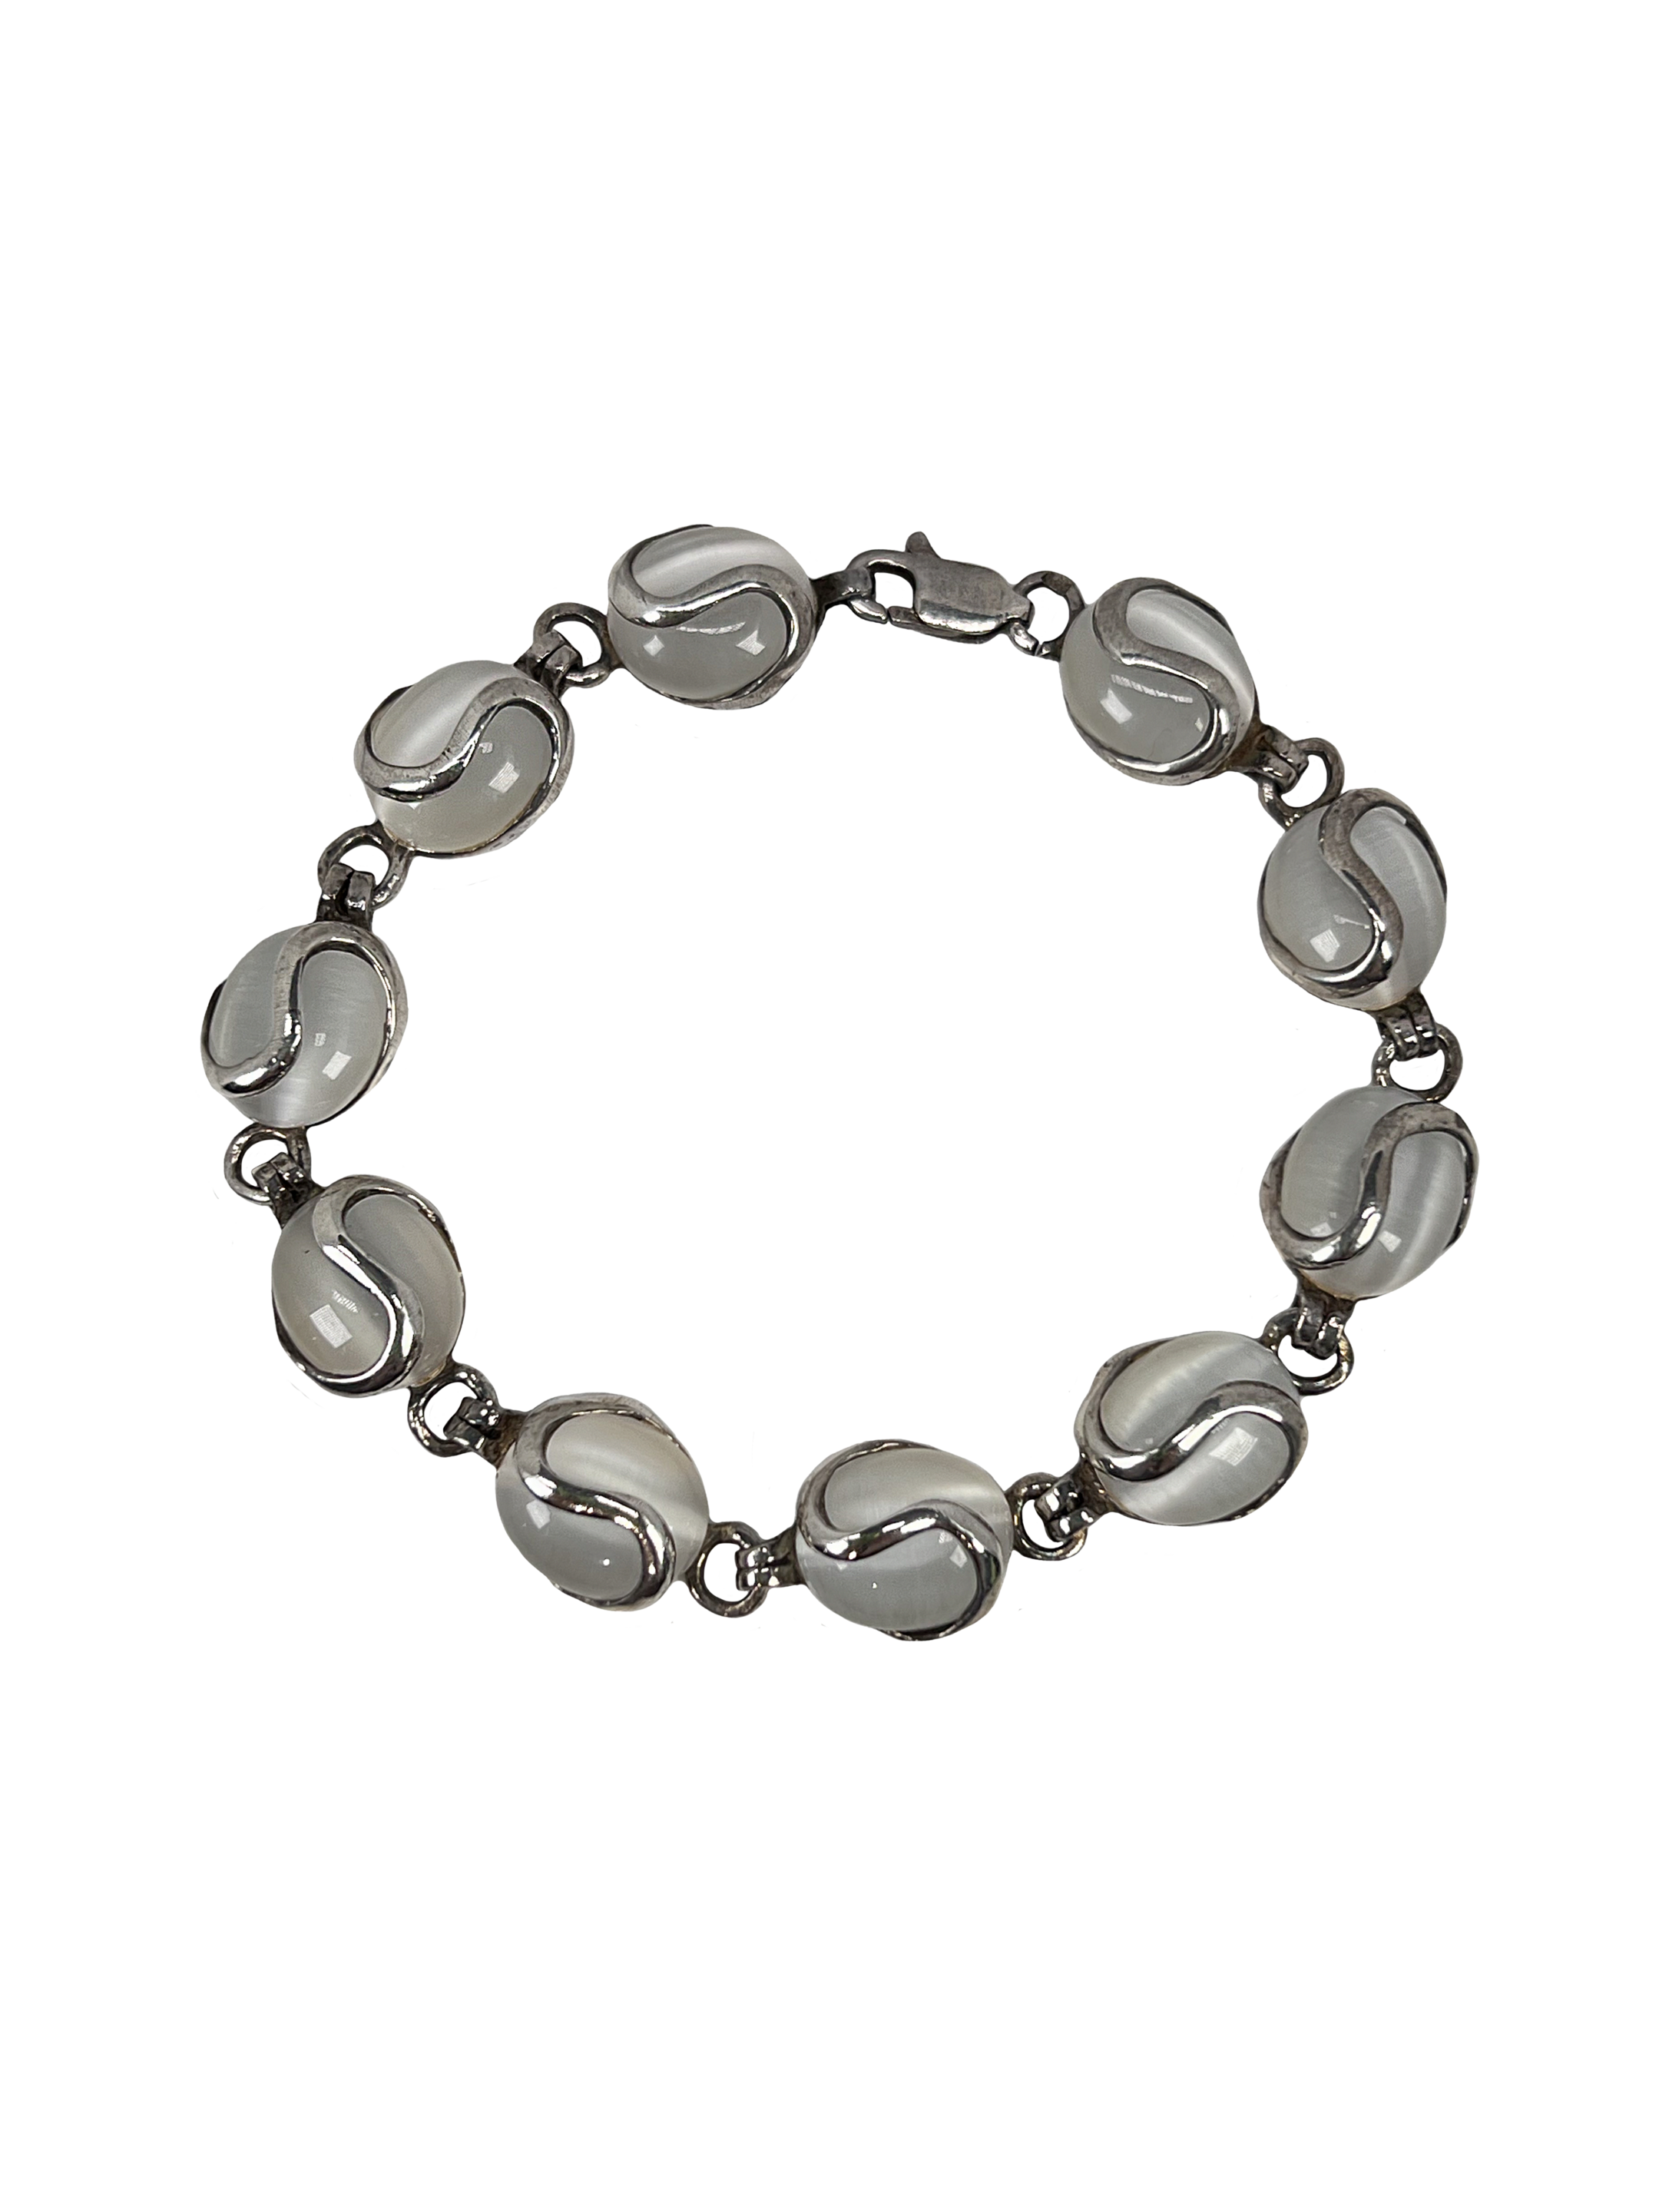 Silver bracelet with gray stones